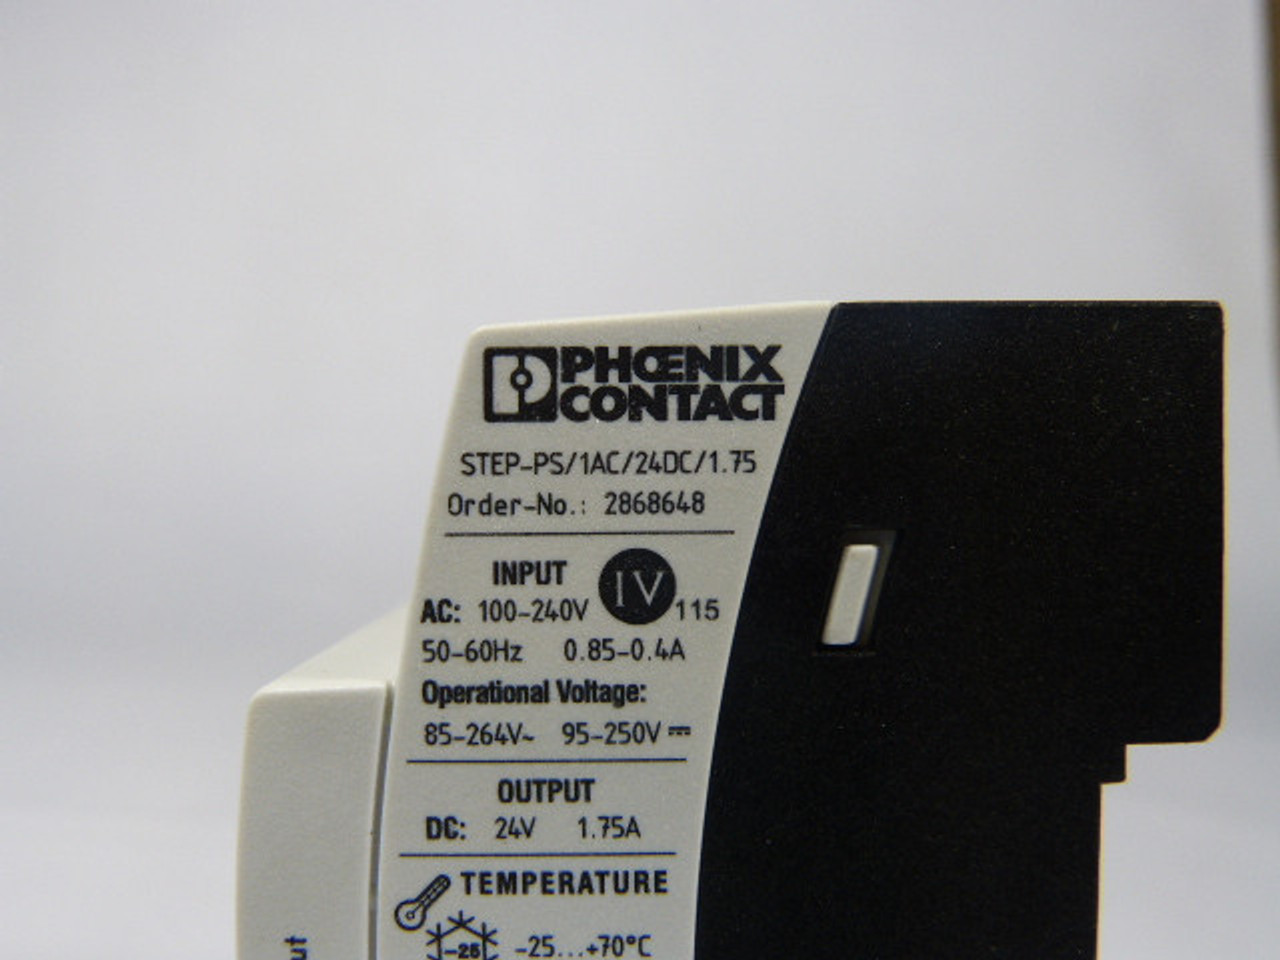 Phoenix Contact STEP-PS/1AC/24DC/1.75 Power Supply 1.75AMP 1 Phase USED